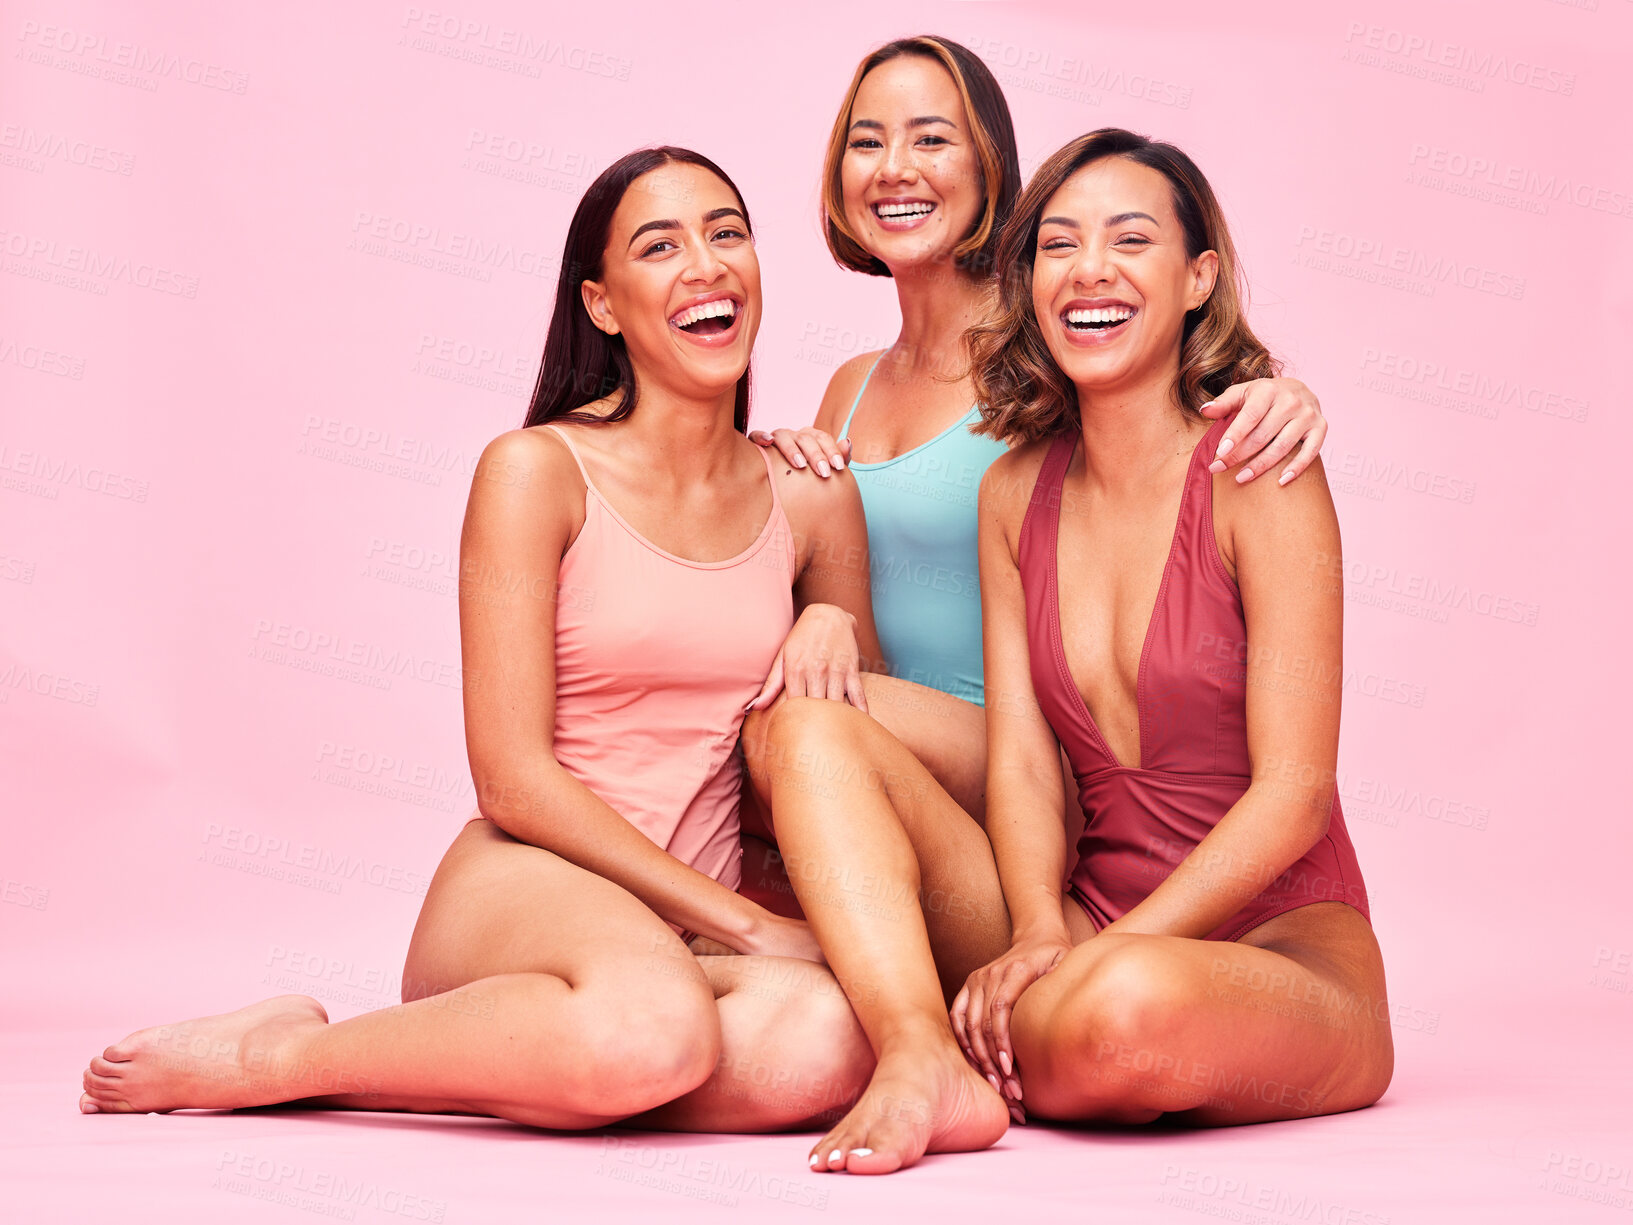 Buy stock photo Diversity, bikini and group of happy women in studio, sitting together with smile and body positivity. Beauty, fun summer fashion and swimwear models with self love, equality and pink background.